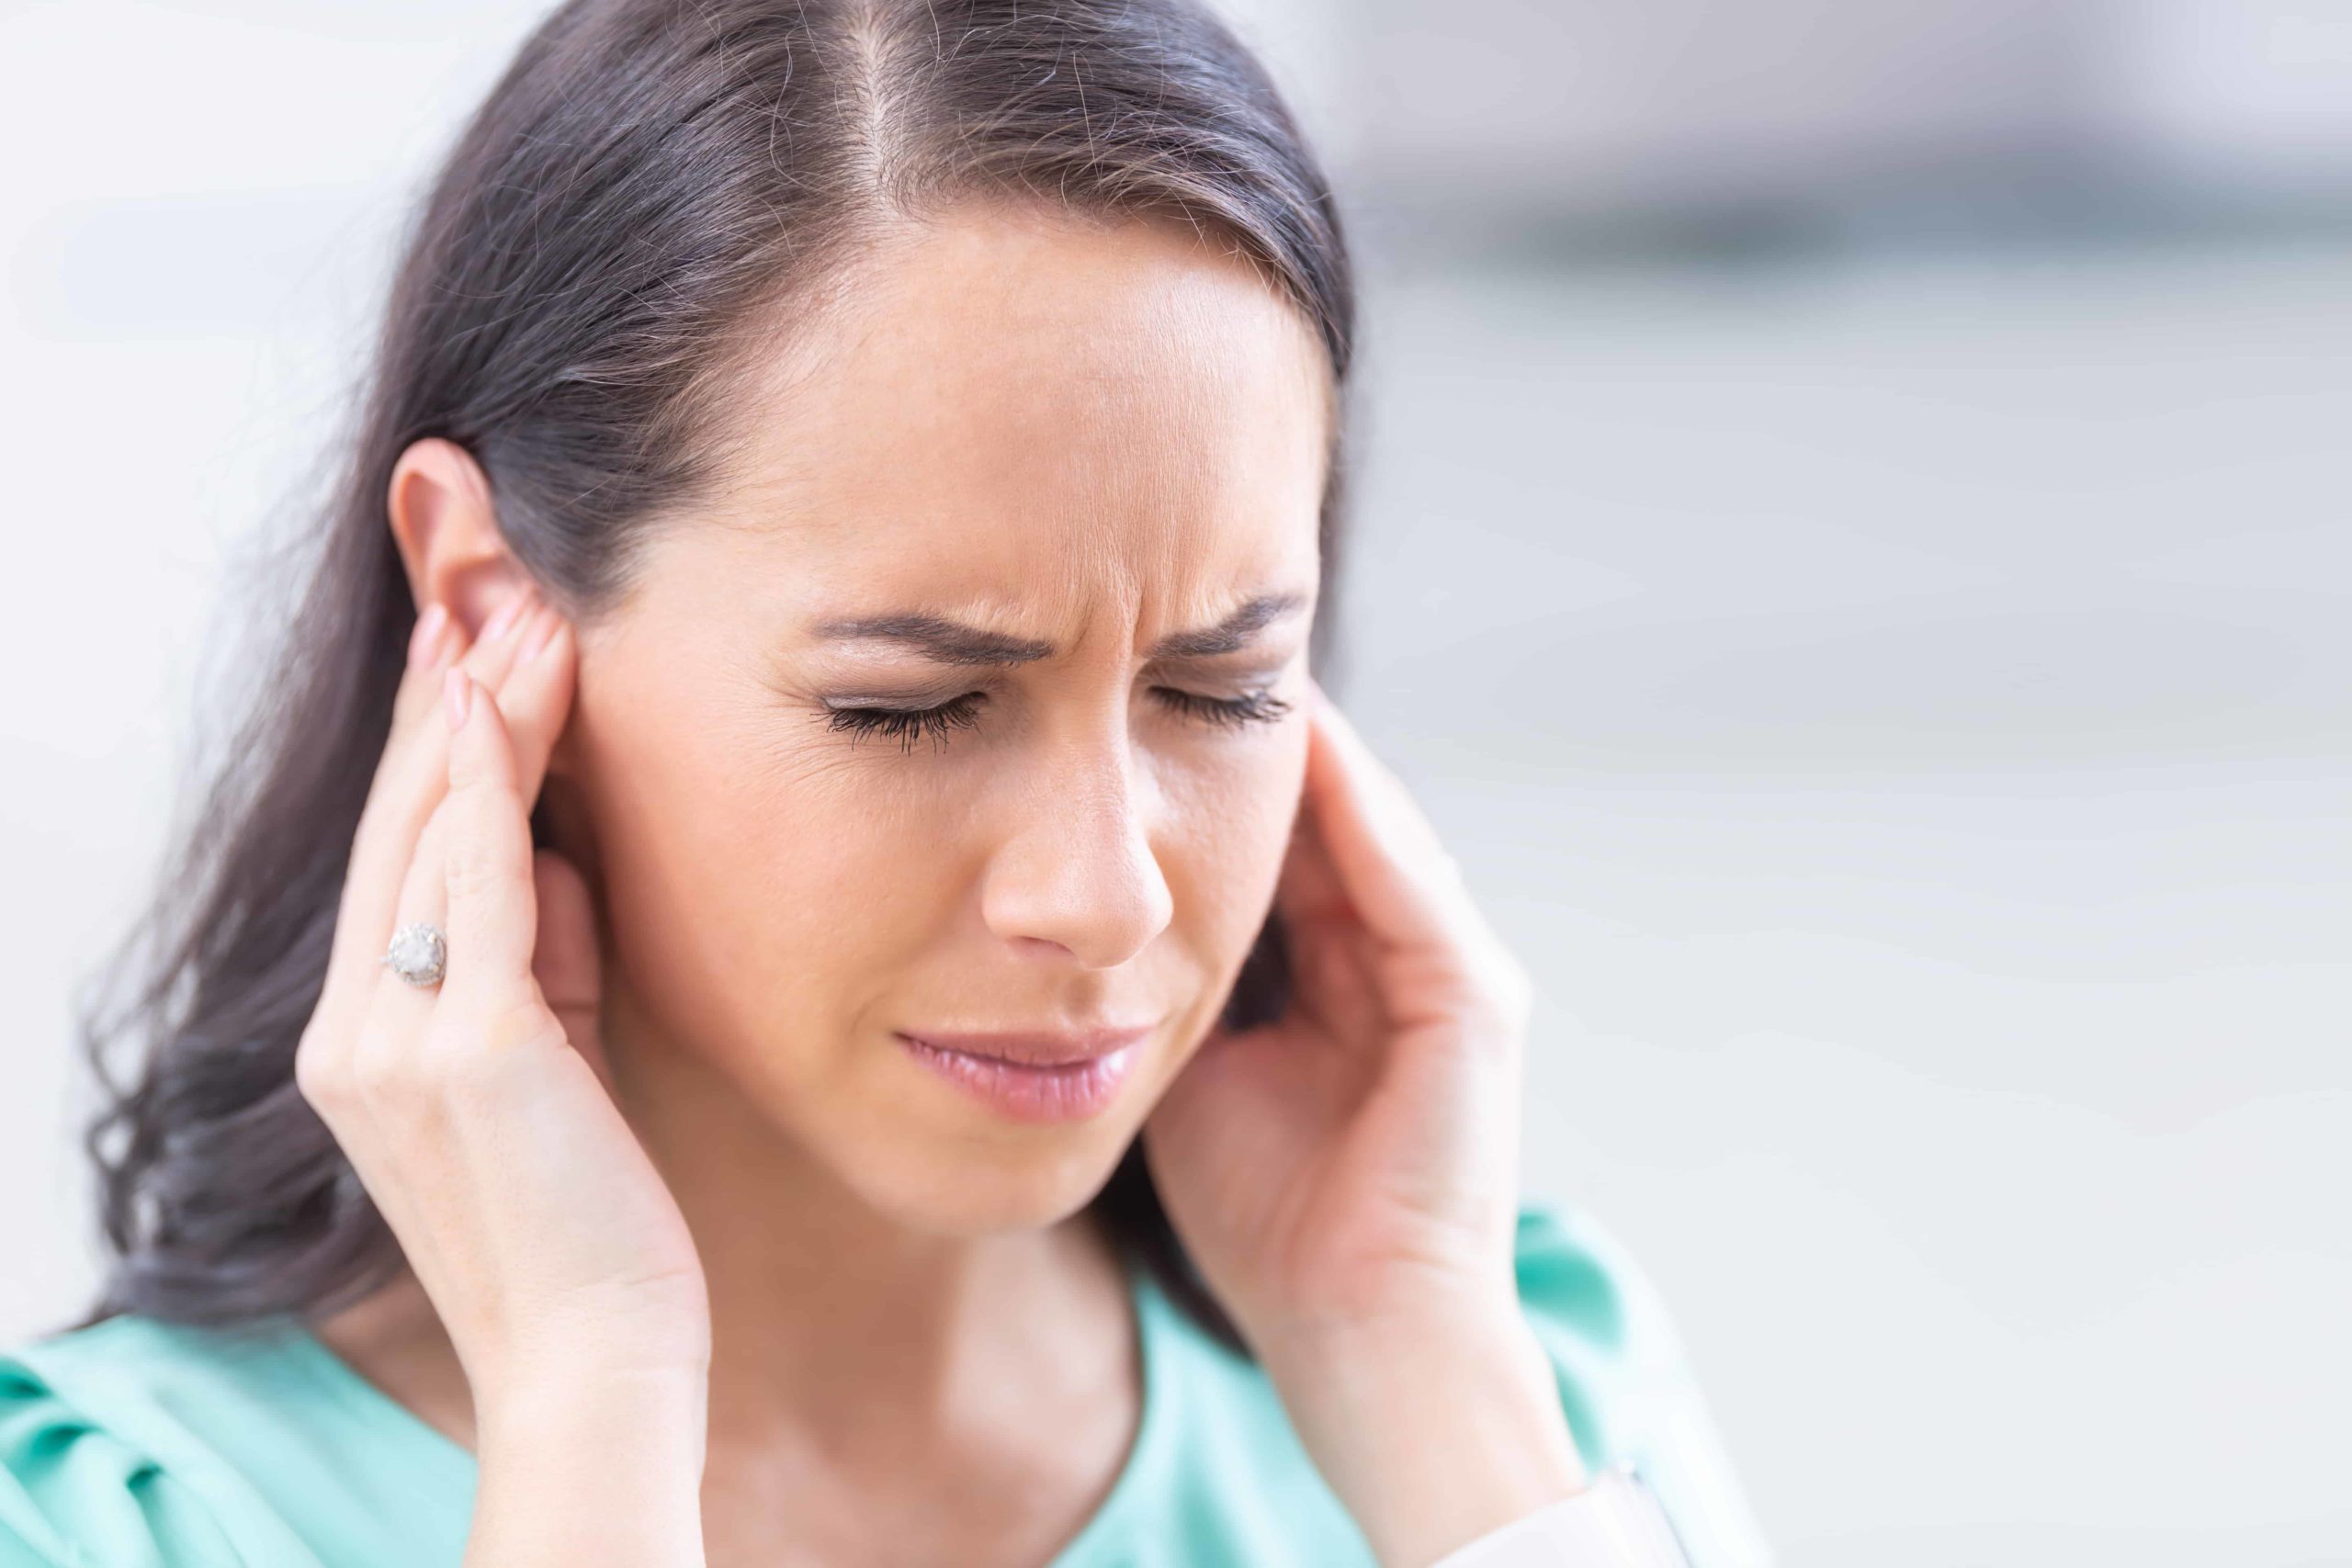 Gulf View Medical Centre - Labyrinthitis is an inner ear disorder. The two  vestibular nerves in your inner ear send your brain information about your  spatial navigation and balance control. When one